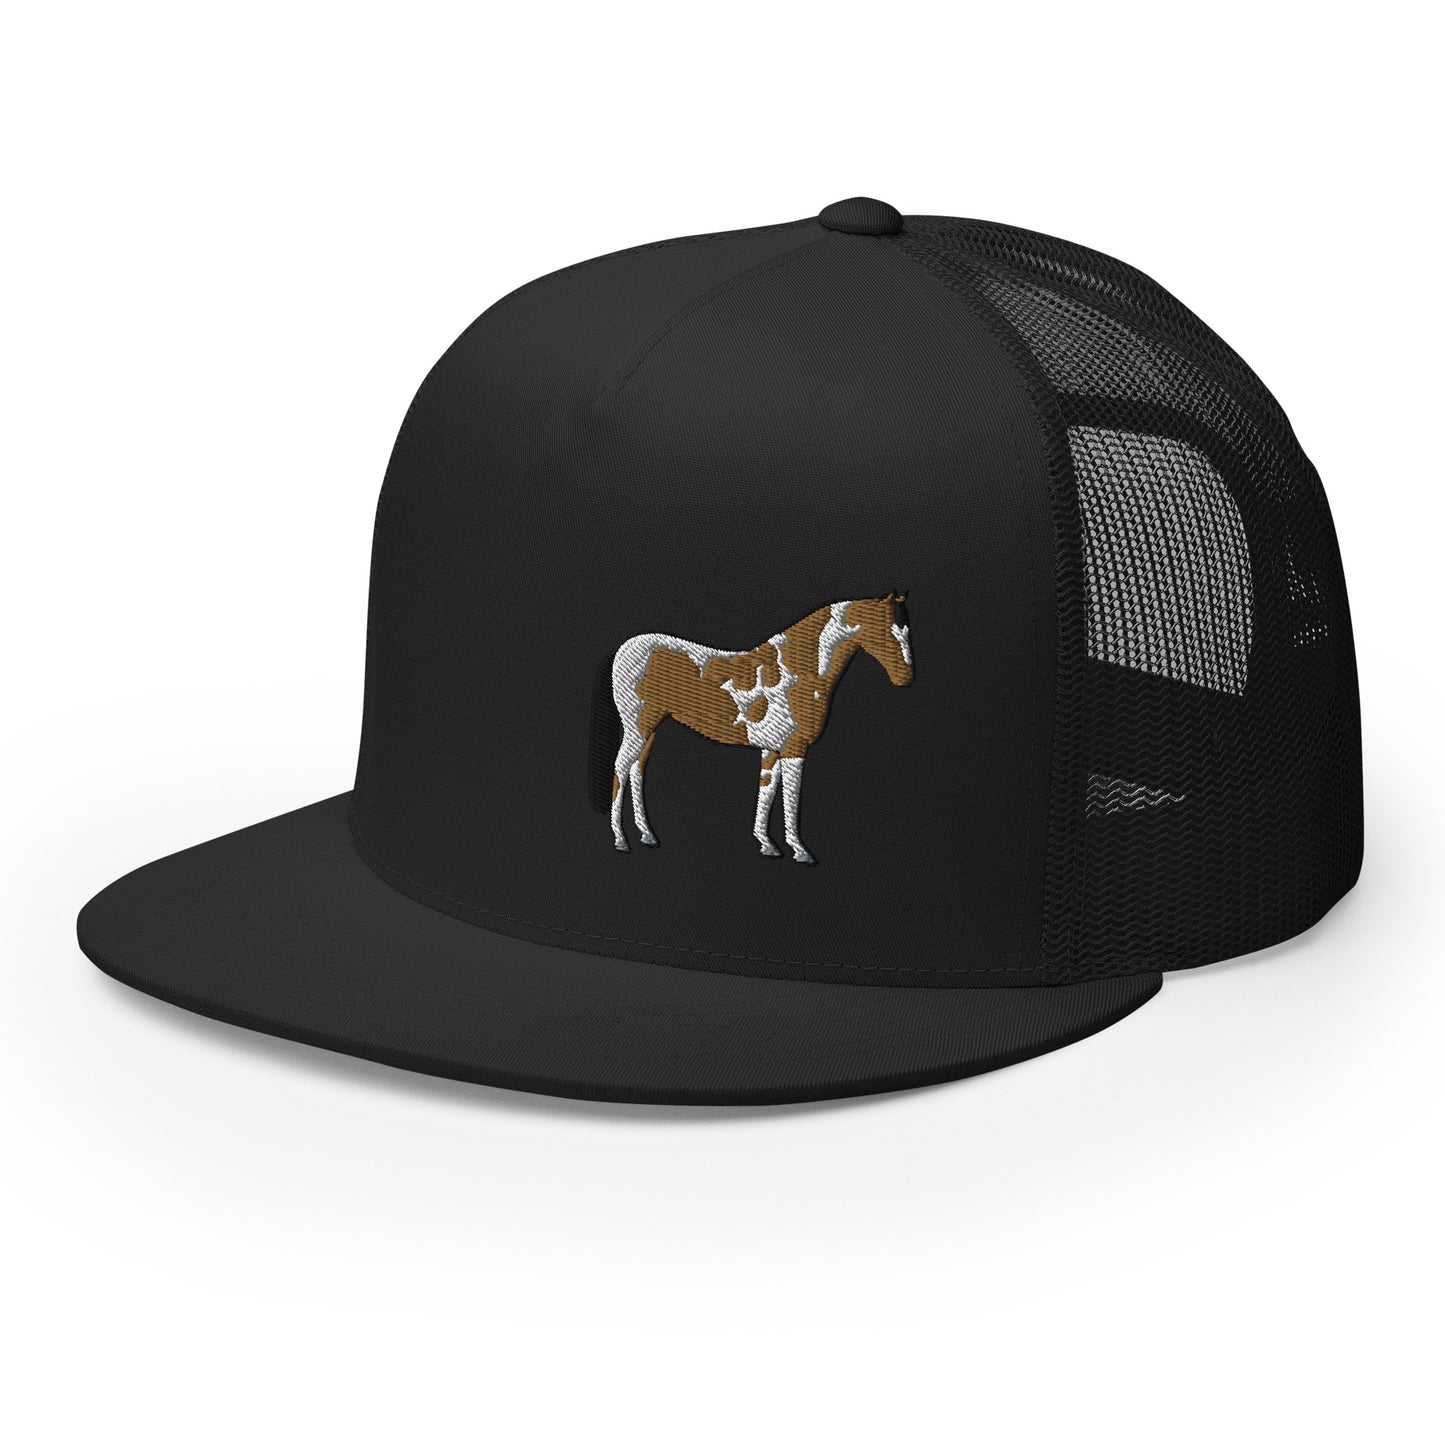 Brown and white Horse Trucker Cap| horse hat